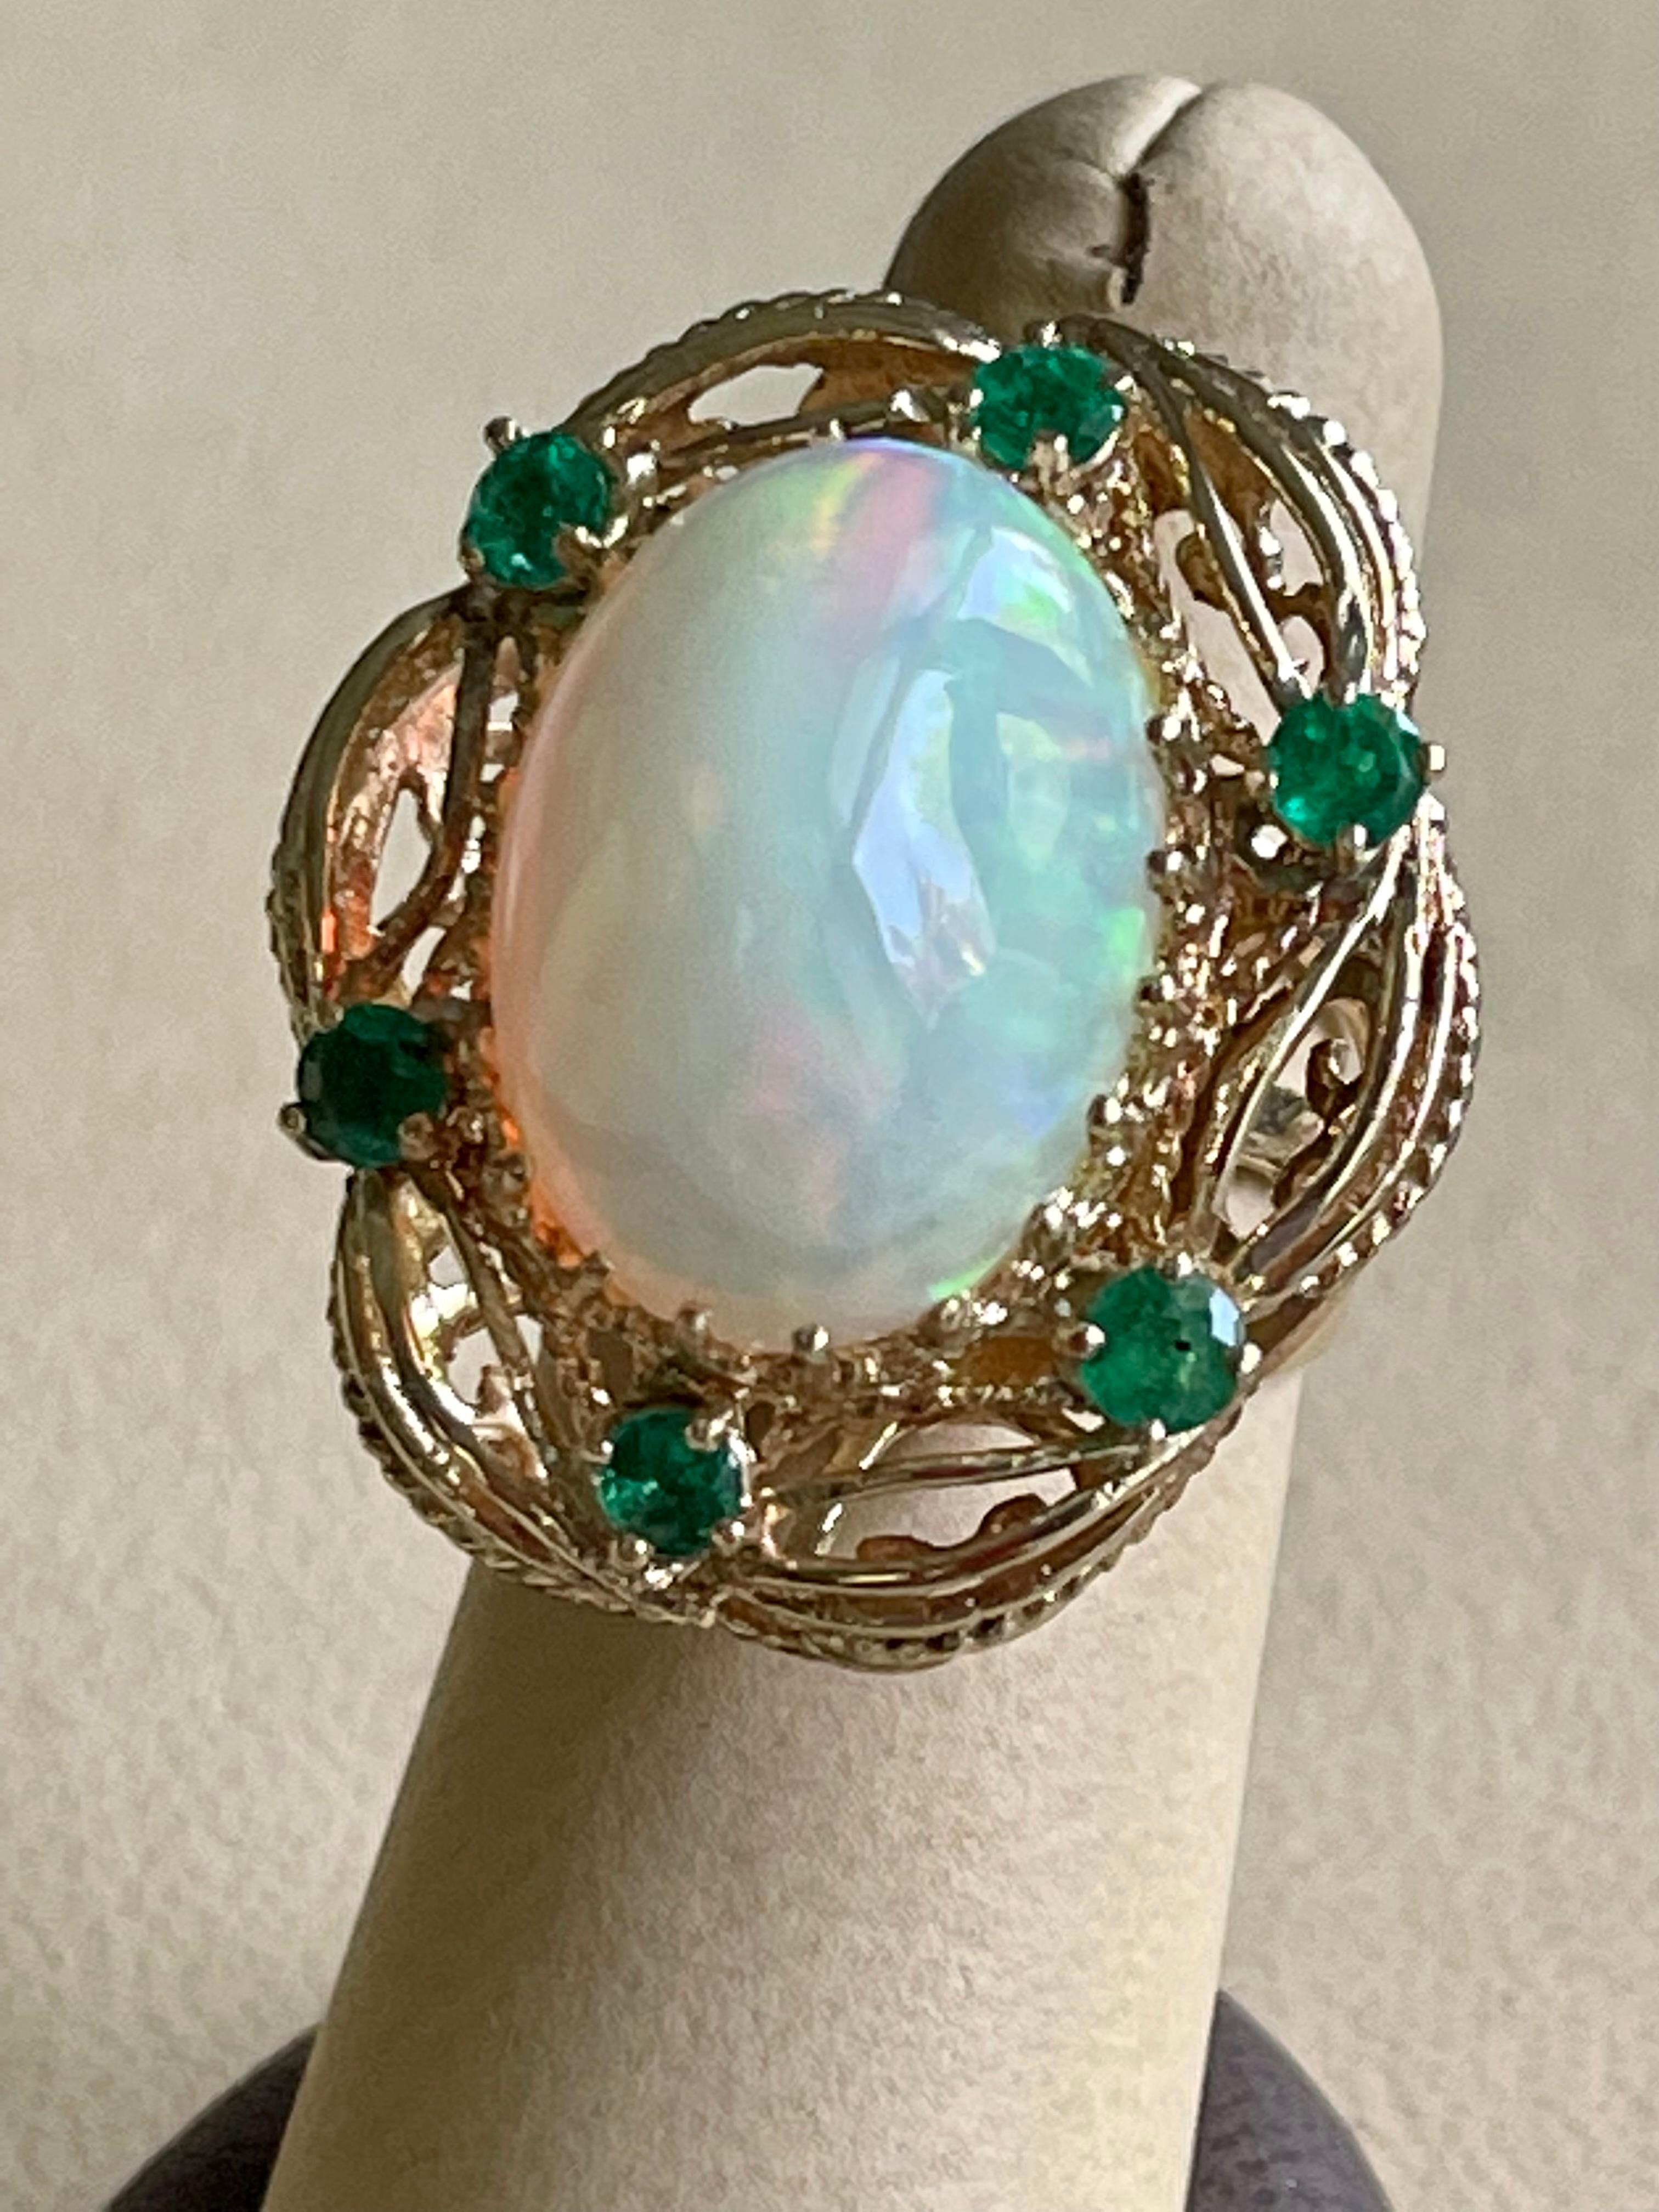 A Huge Cocktail ring 
Approximately 15 Carat Oval Ethiopian Opal  & Emerald Ring 14 Karat Yellow Gold Size 7
This spectacular Ring consisting of a single Oval Shape Ethiopian Opal Approximately 15 Carat. 

very clean Stone no inclusion , full of